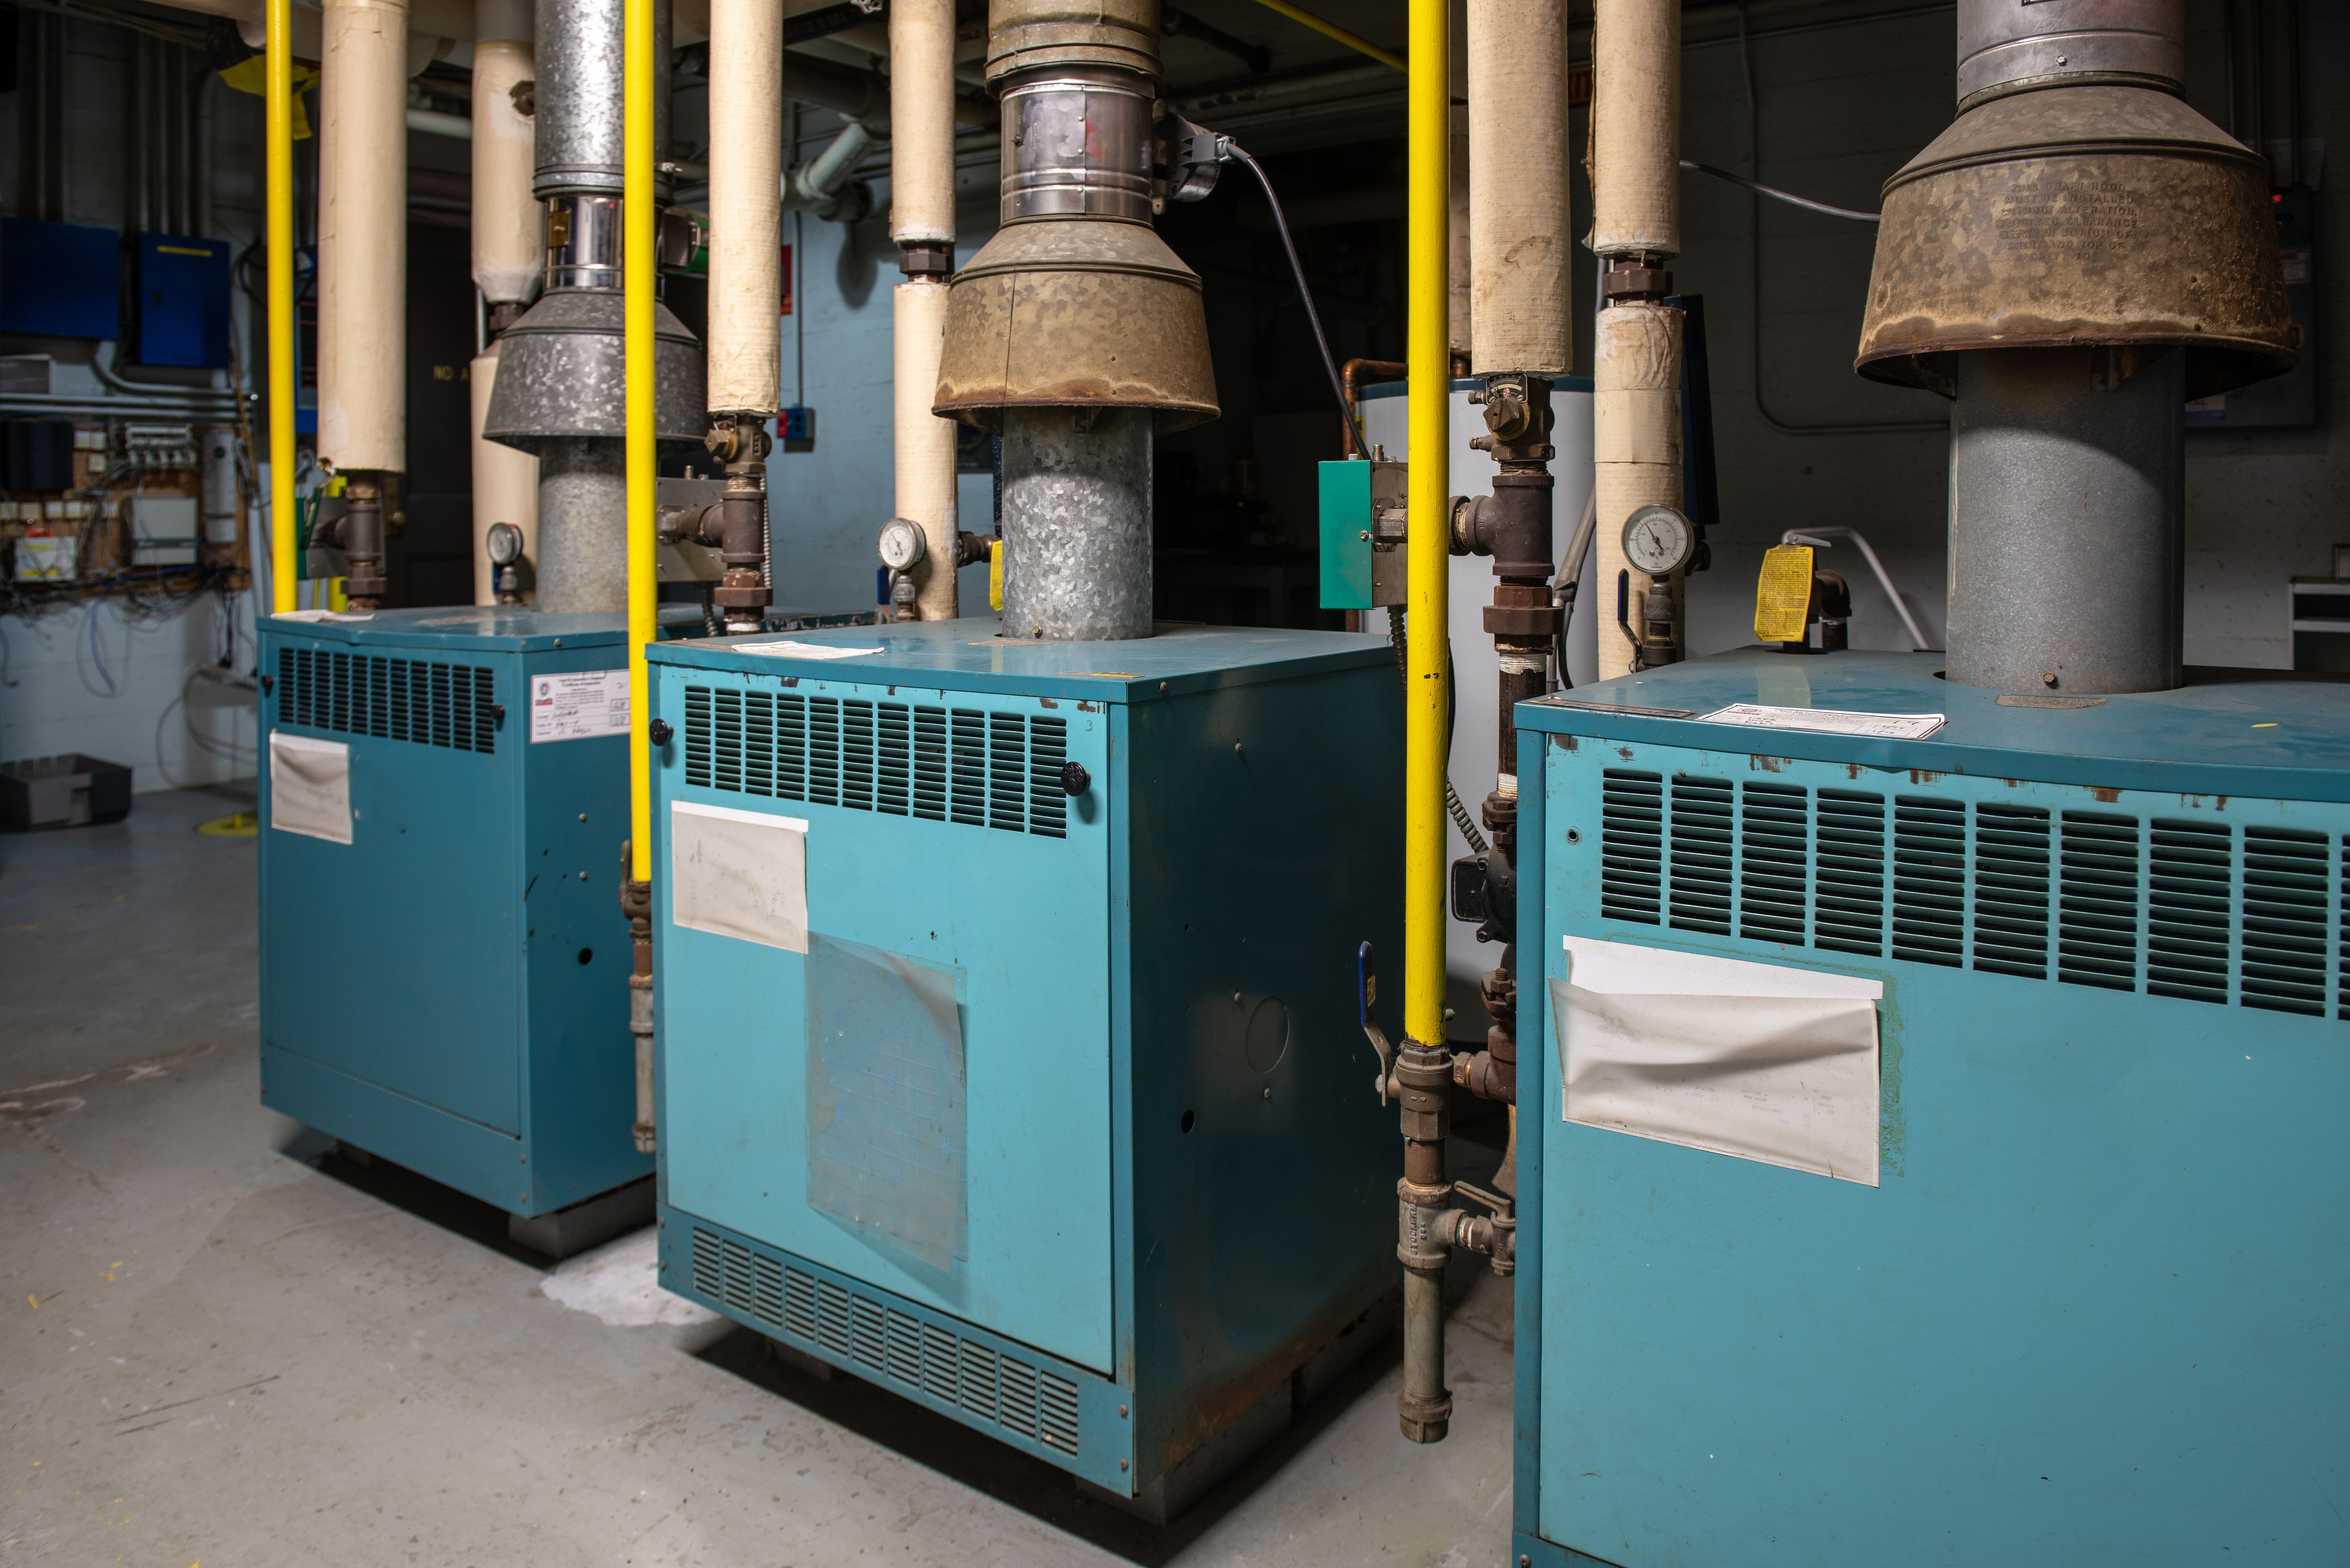 Multiple Boilers Side-By-Side in a Multi-Family Residence